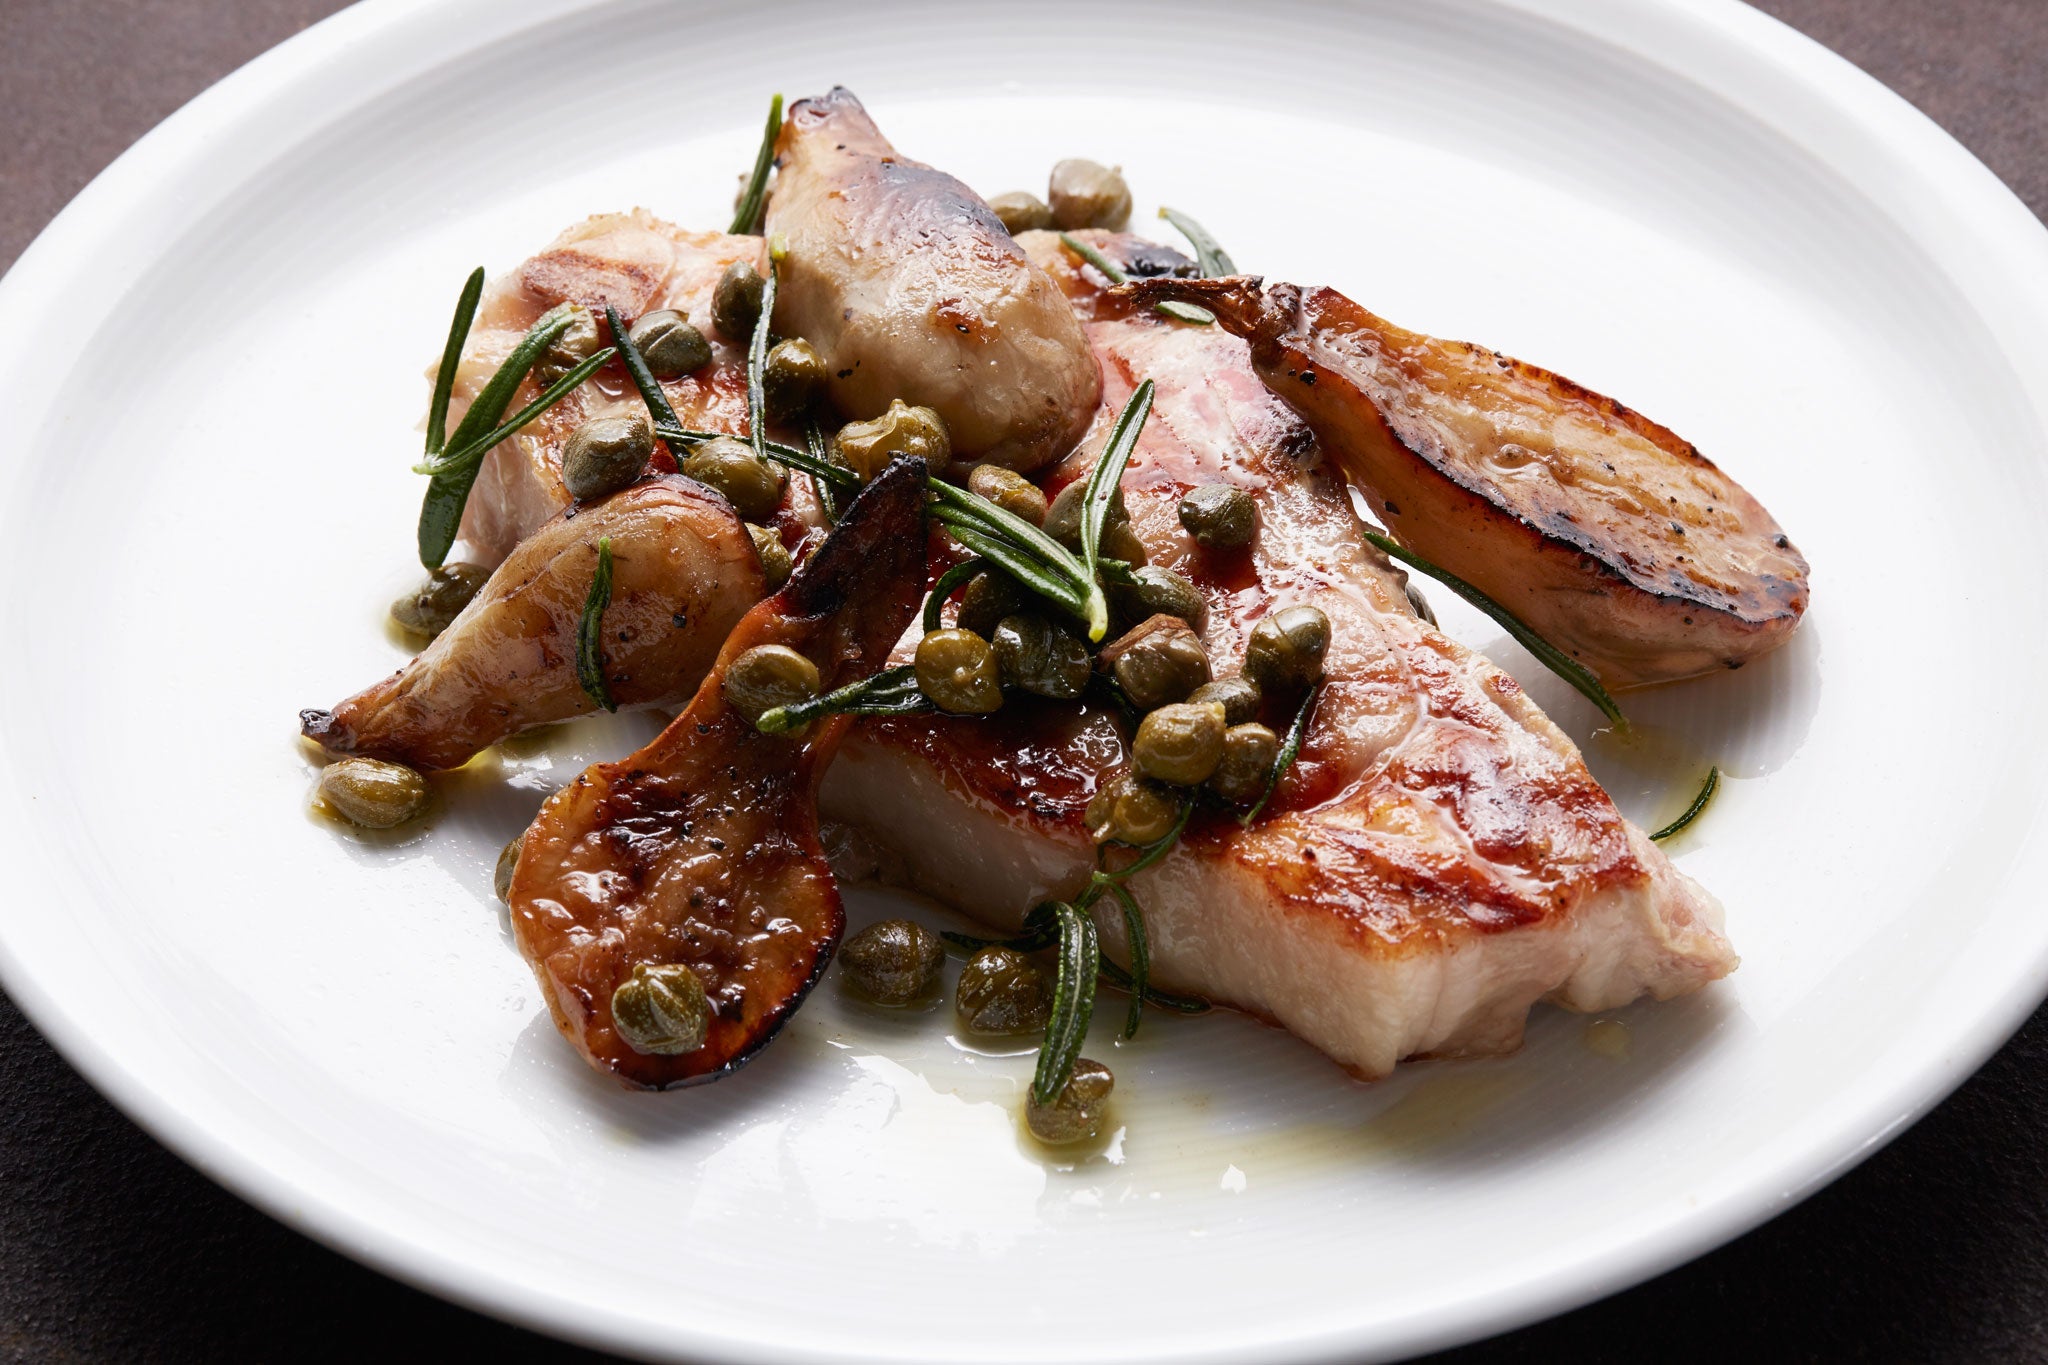 Grilled veal chop with Jerusalem artichokes, capers and rosemary